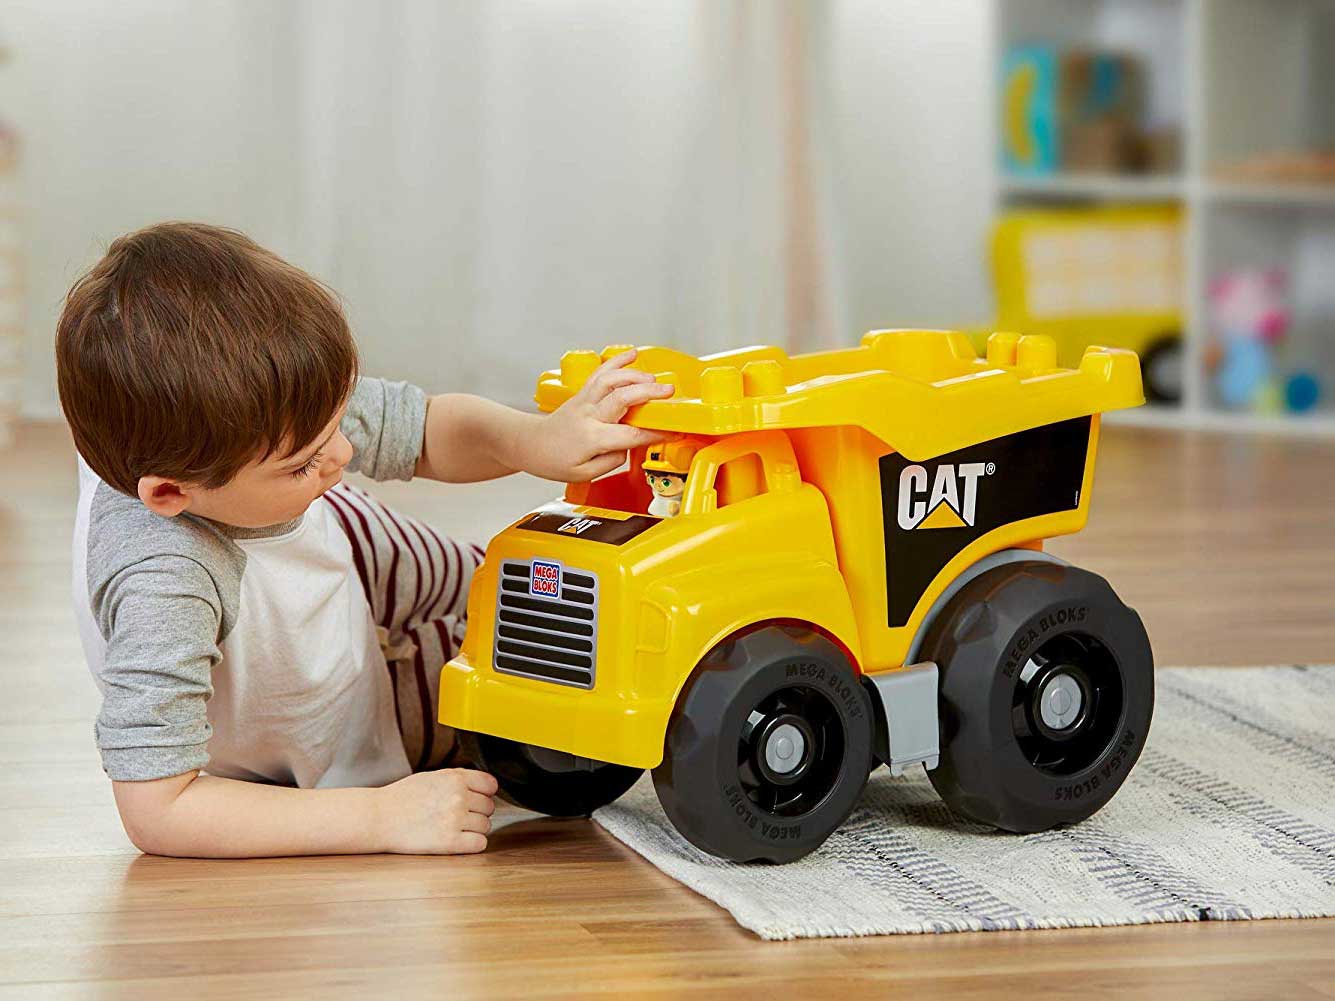 Mega Blok large dump truck comes with a few blocks but is even better matched up with a big collection of Mega Blok.